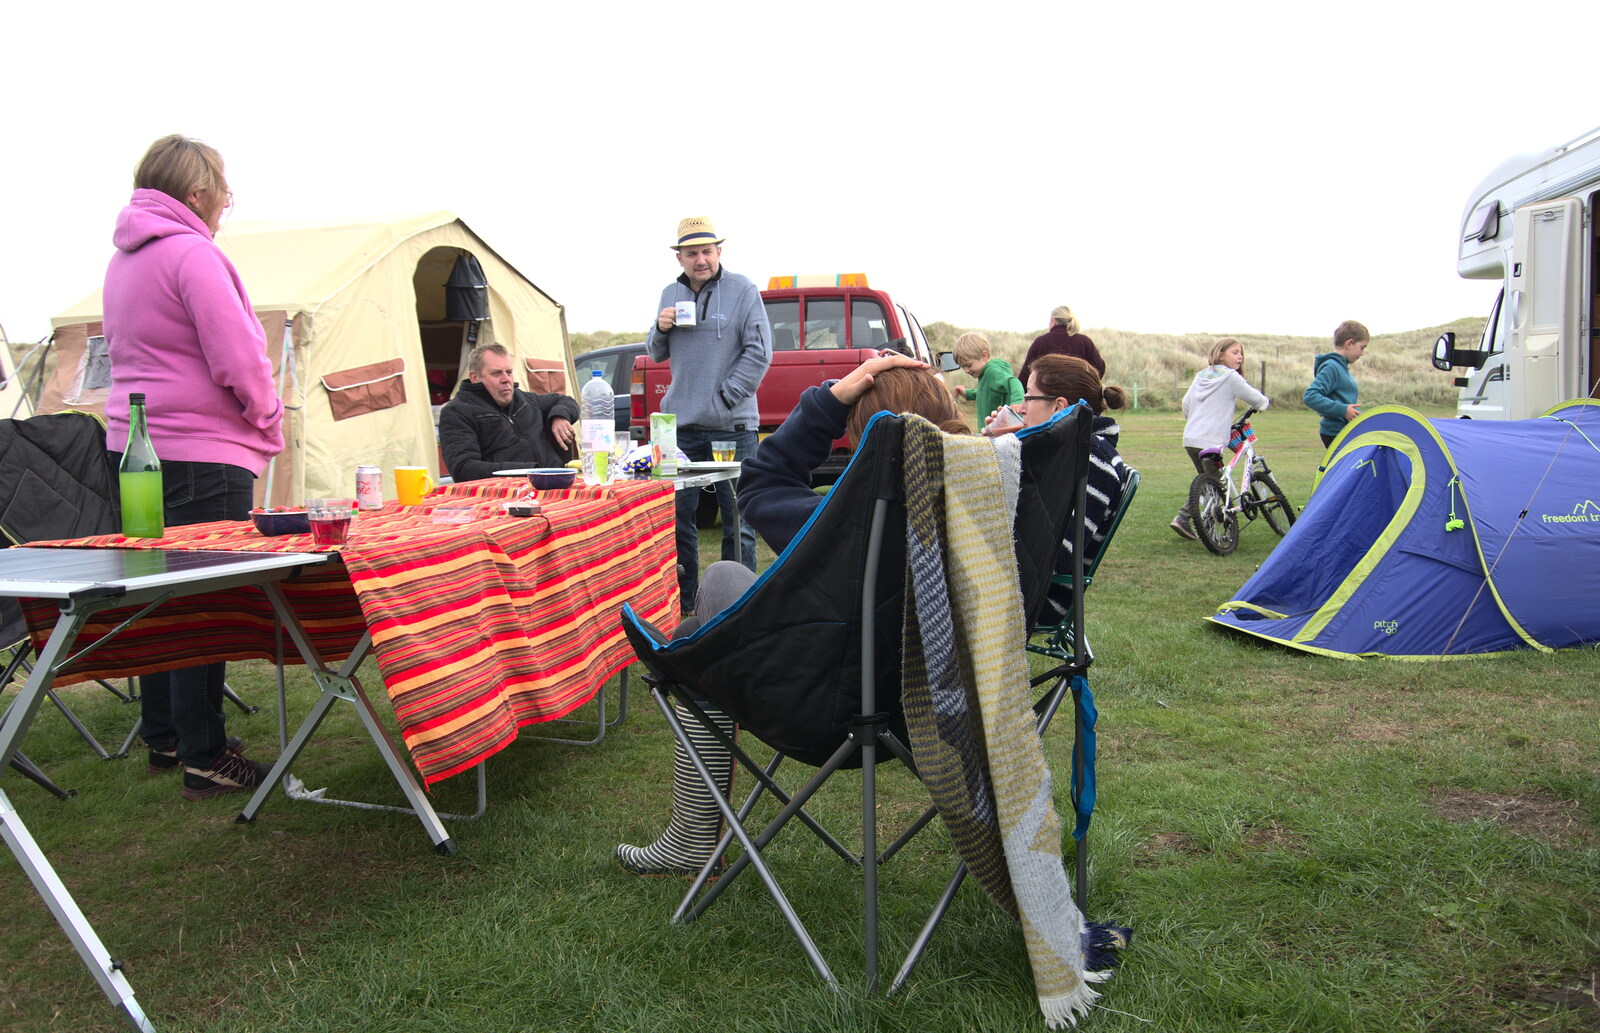 It's chilly at breakfast from An Optimistic Camping Weekend, Waxham Sands, Norfolk - 22nd September 2018